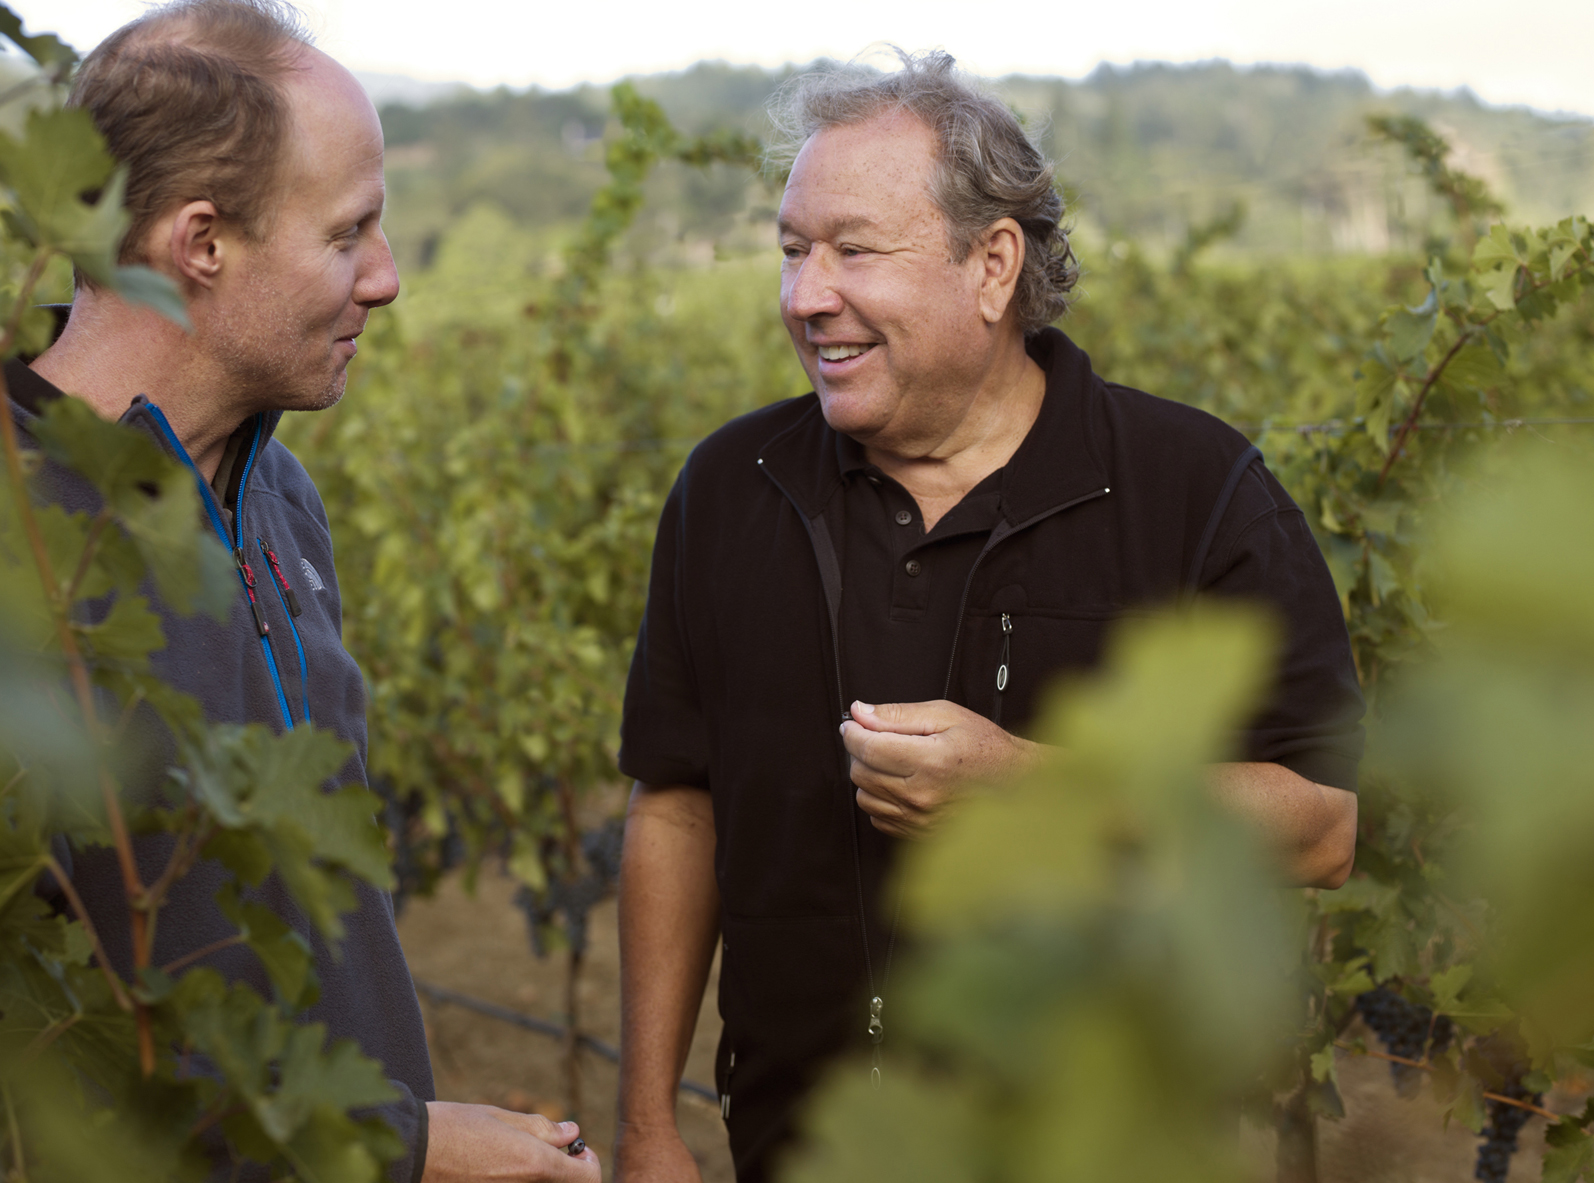 Award-winning winemaker, Thomas Rivers Brown - pictured with Mark Pulido - hand selected and blended wines from Pulido-Walker’s best barrels of Clone 7 and 337.